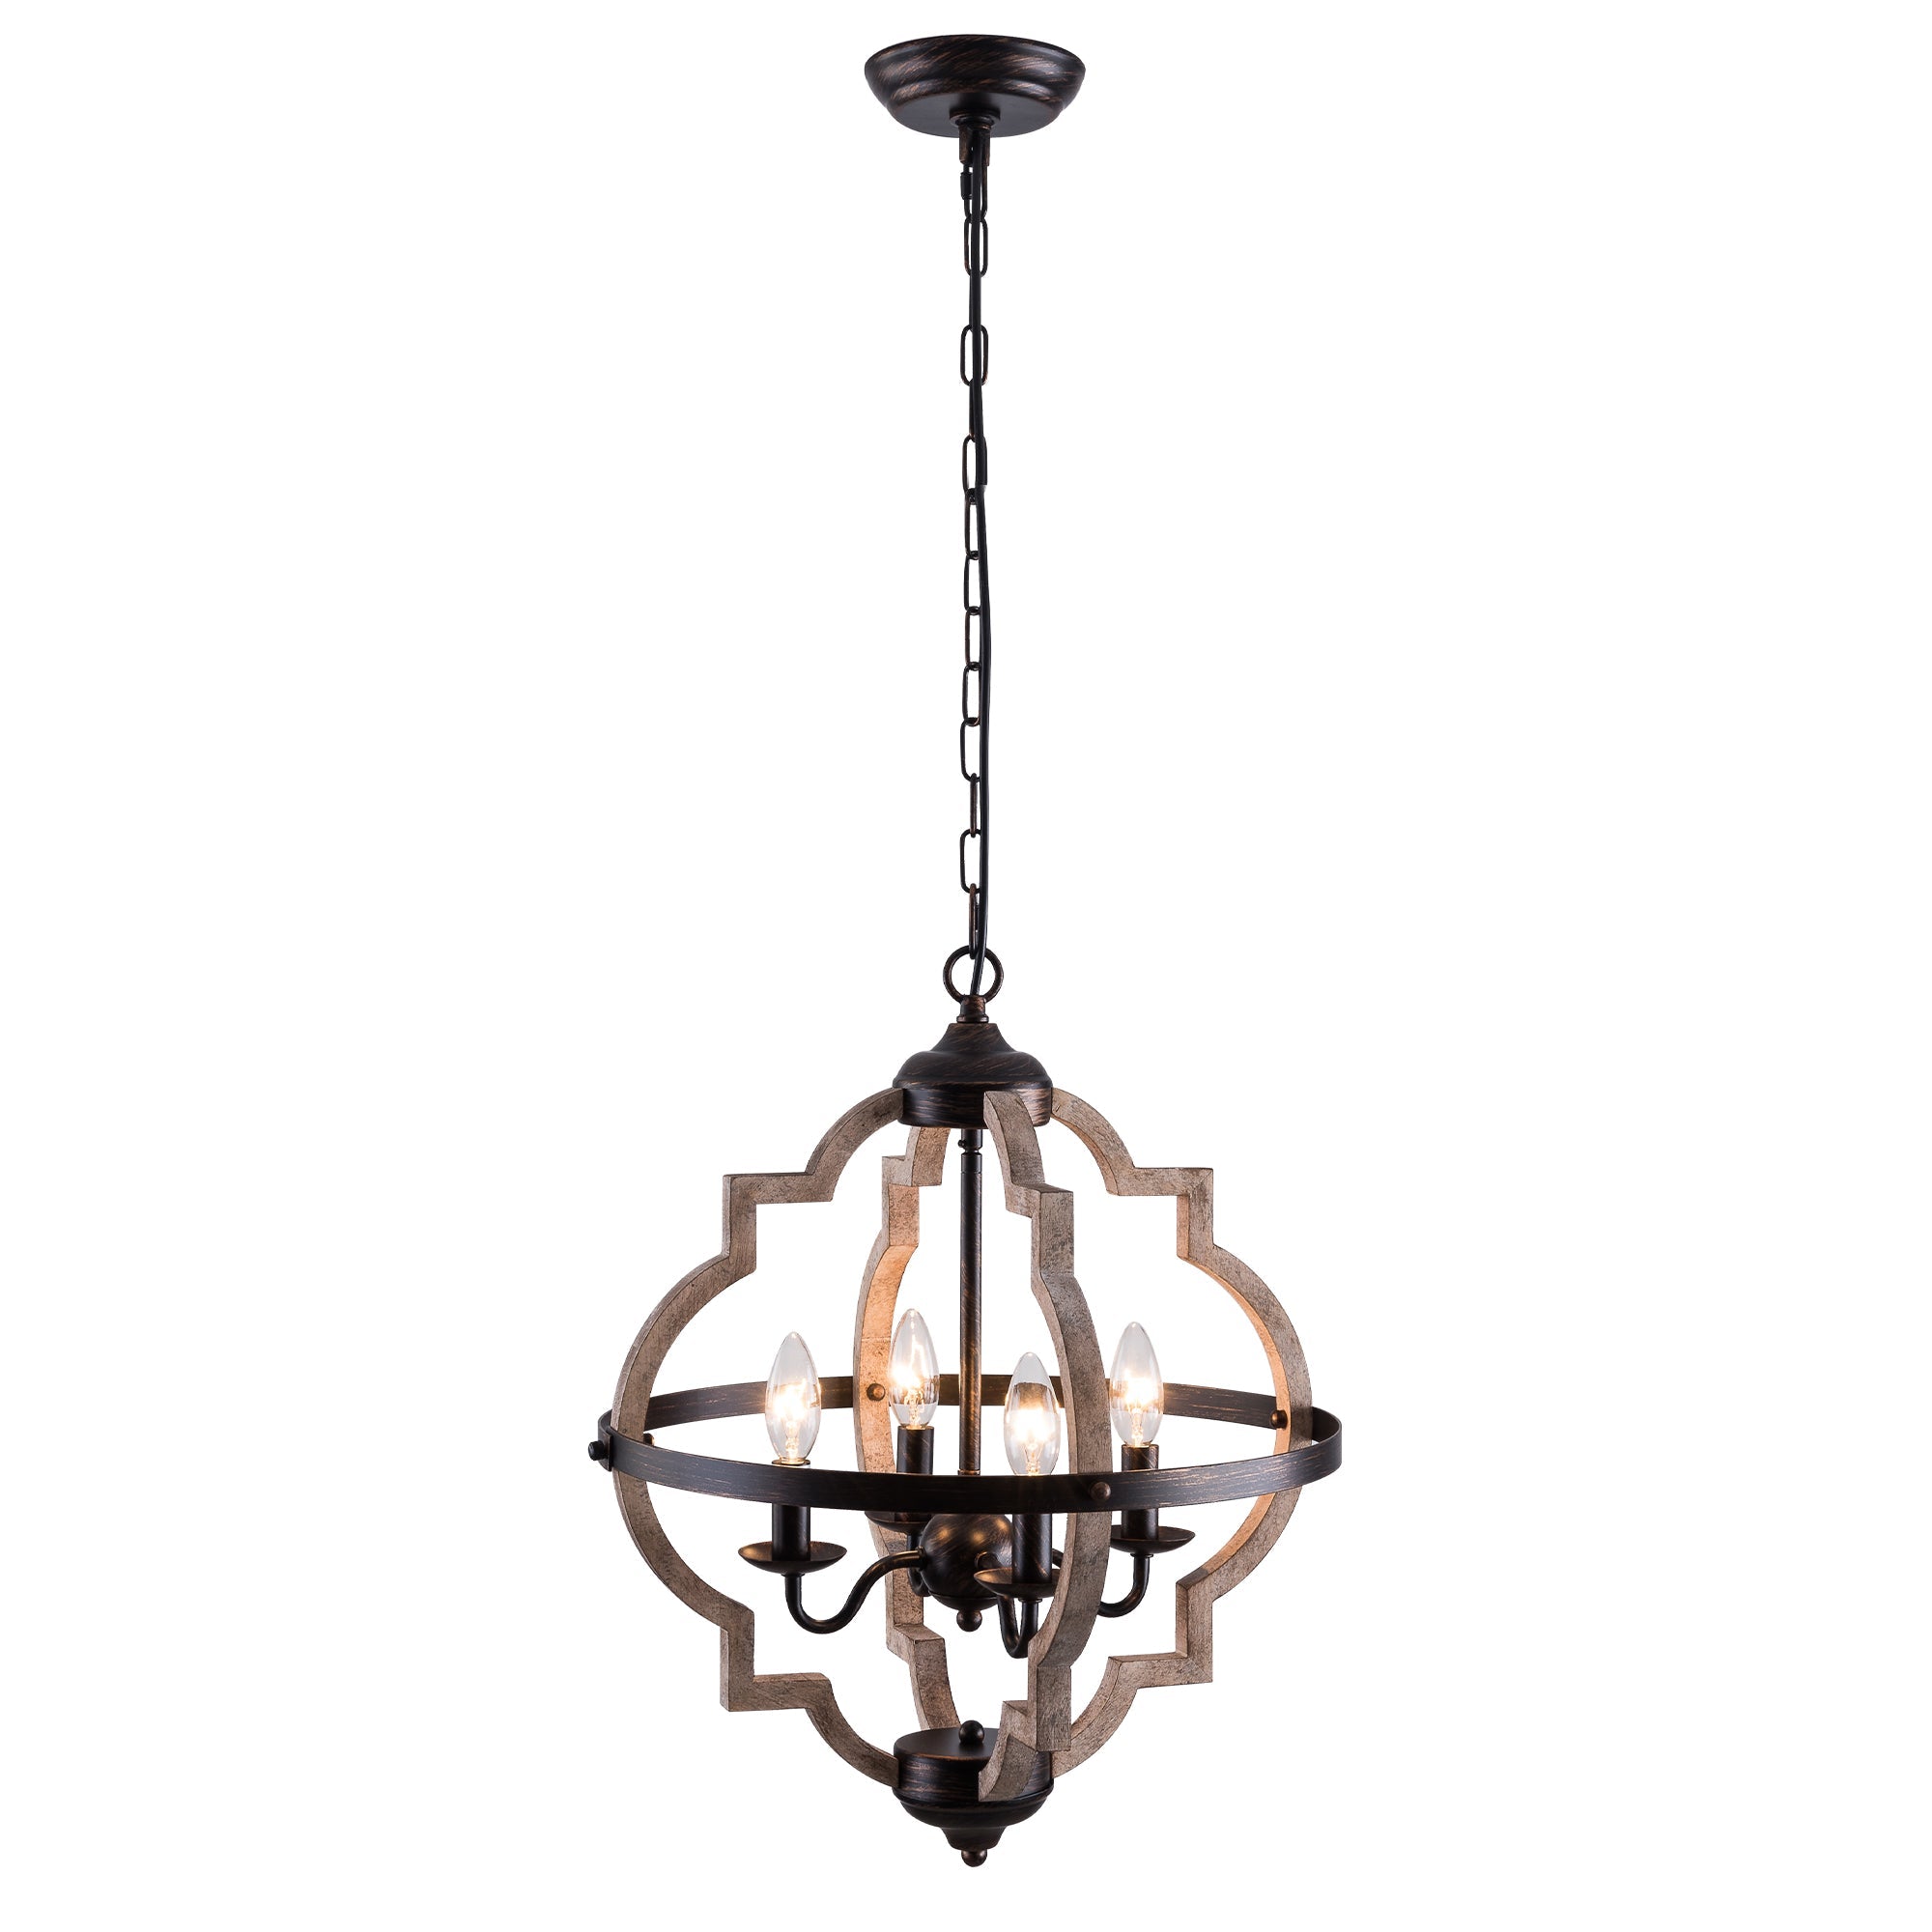 UHG Orb Candle 4-Light Chandelier in Wood Color Painted Finish, Rustic Farmhouse Flush Mount  Metal Pendant Lighting Fixture, Height Adjustable Ceiling Light for Dining&Living Room Bedroom Hallway Kitchen Island Foyer Entryway